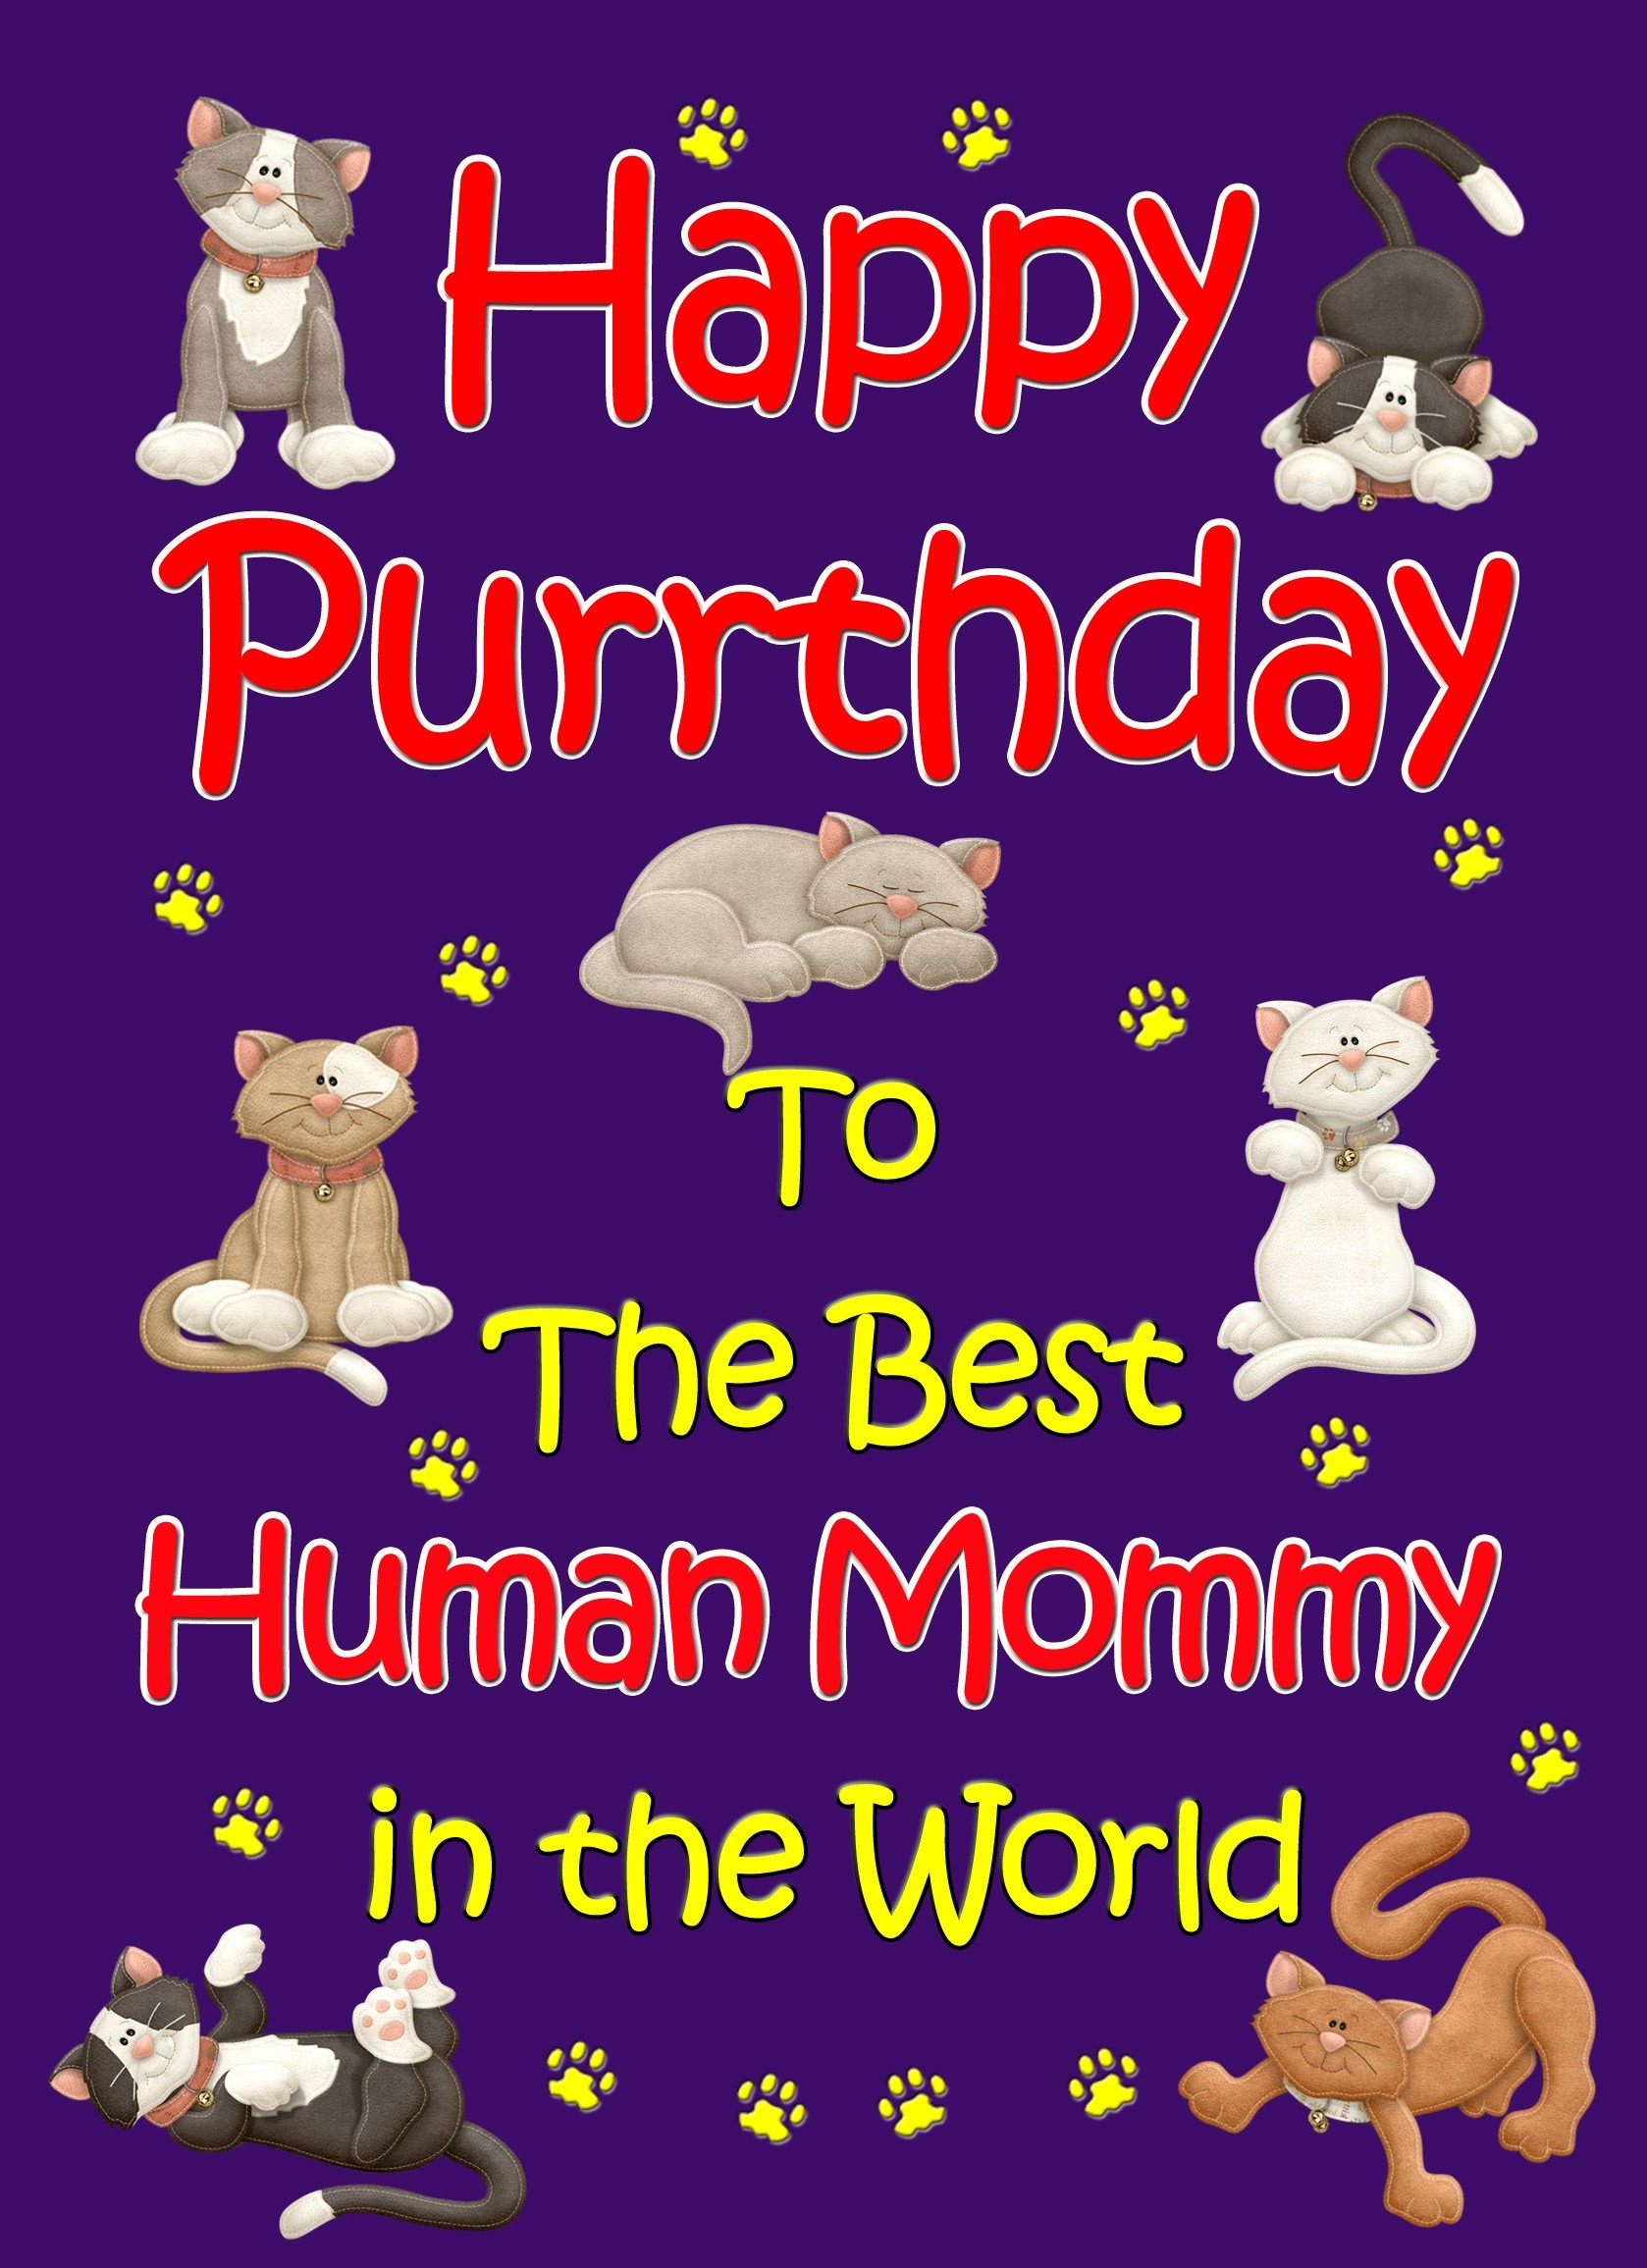 From The Cat Birthday Card (Purple, Human Mommy, Happy Purrthday)